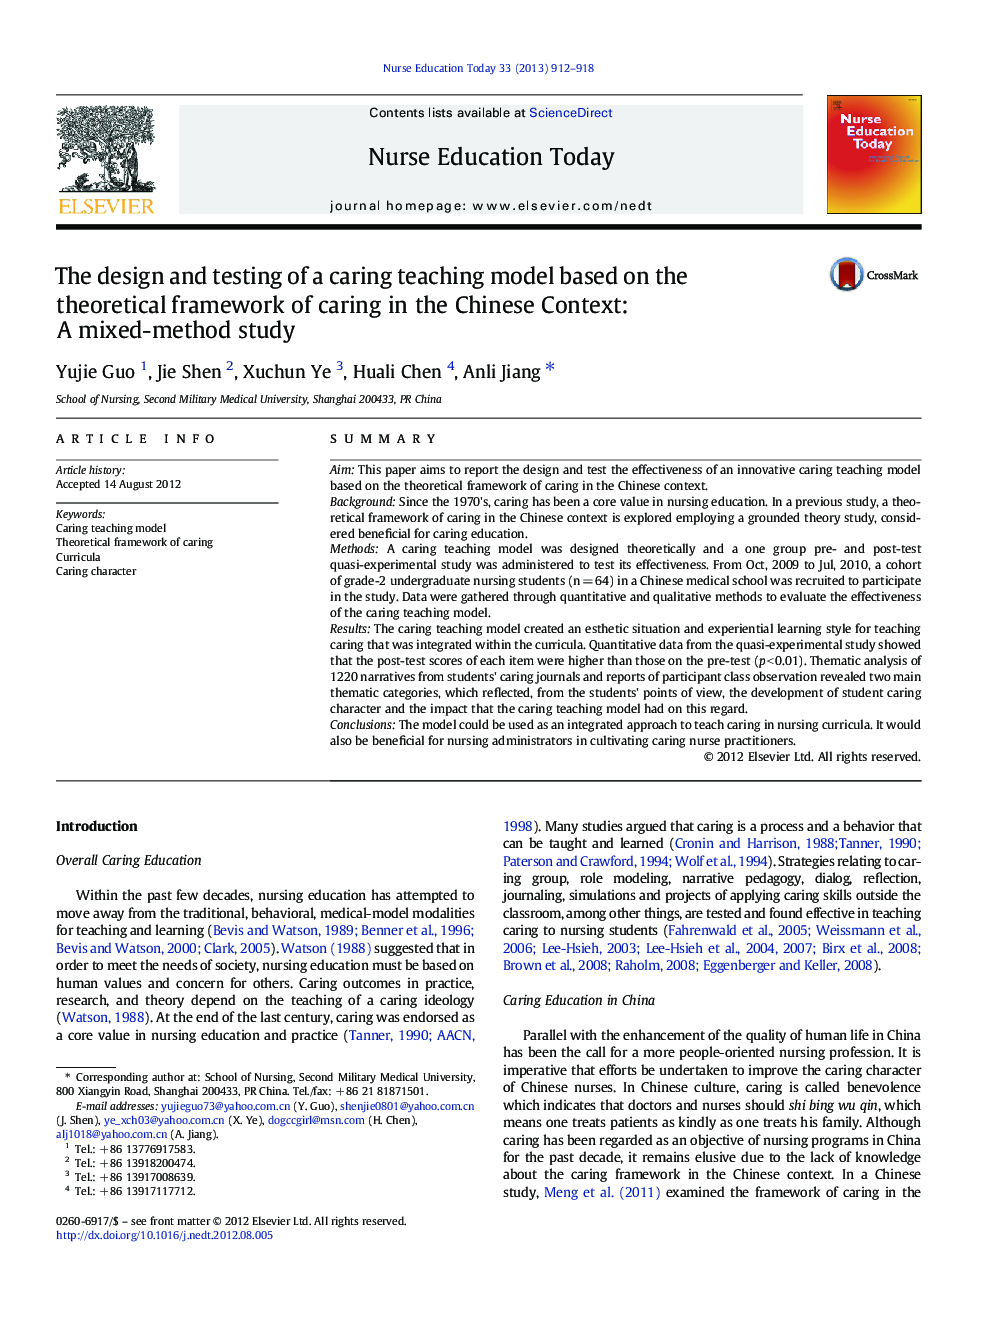 The design and testing of a caring teaching model based on the theoretical framework of caring in the Chinese Context: A mixed-method study